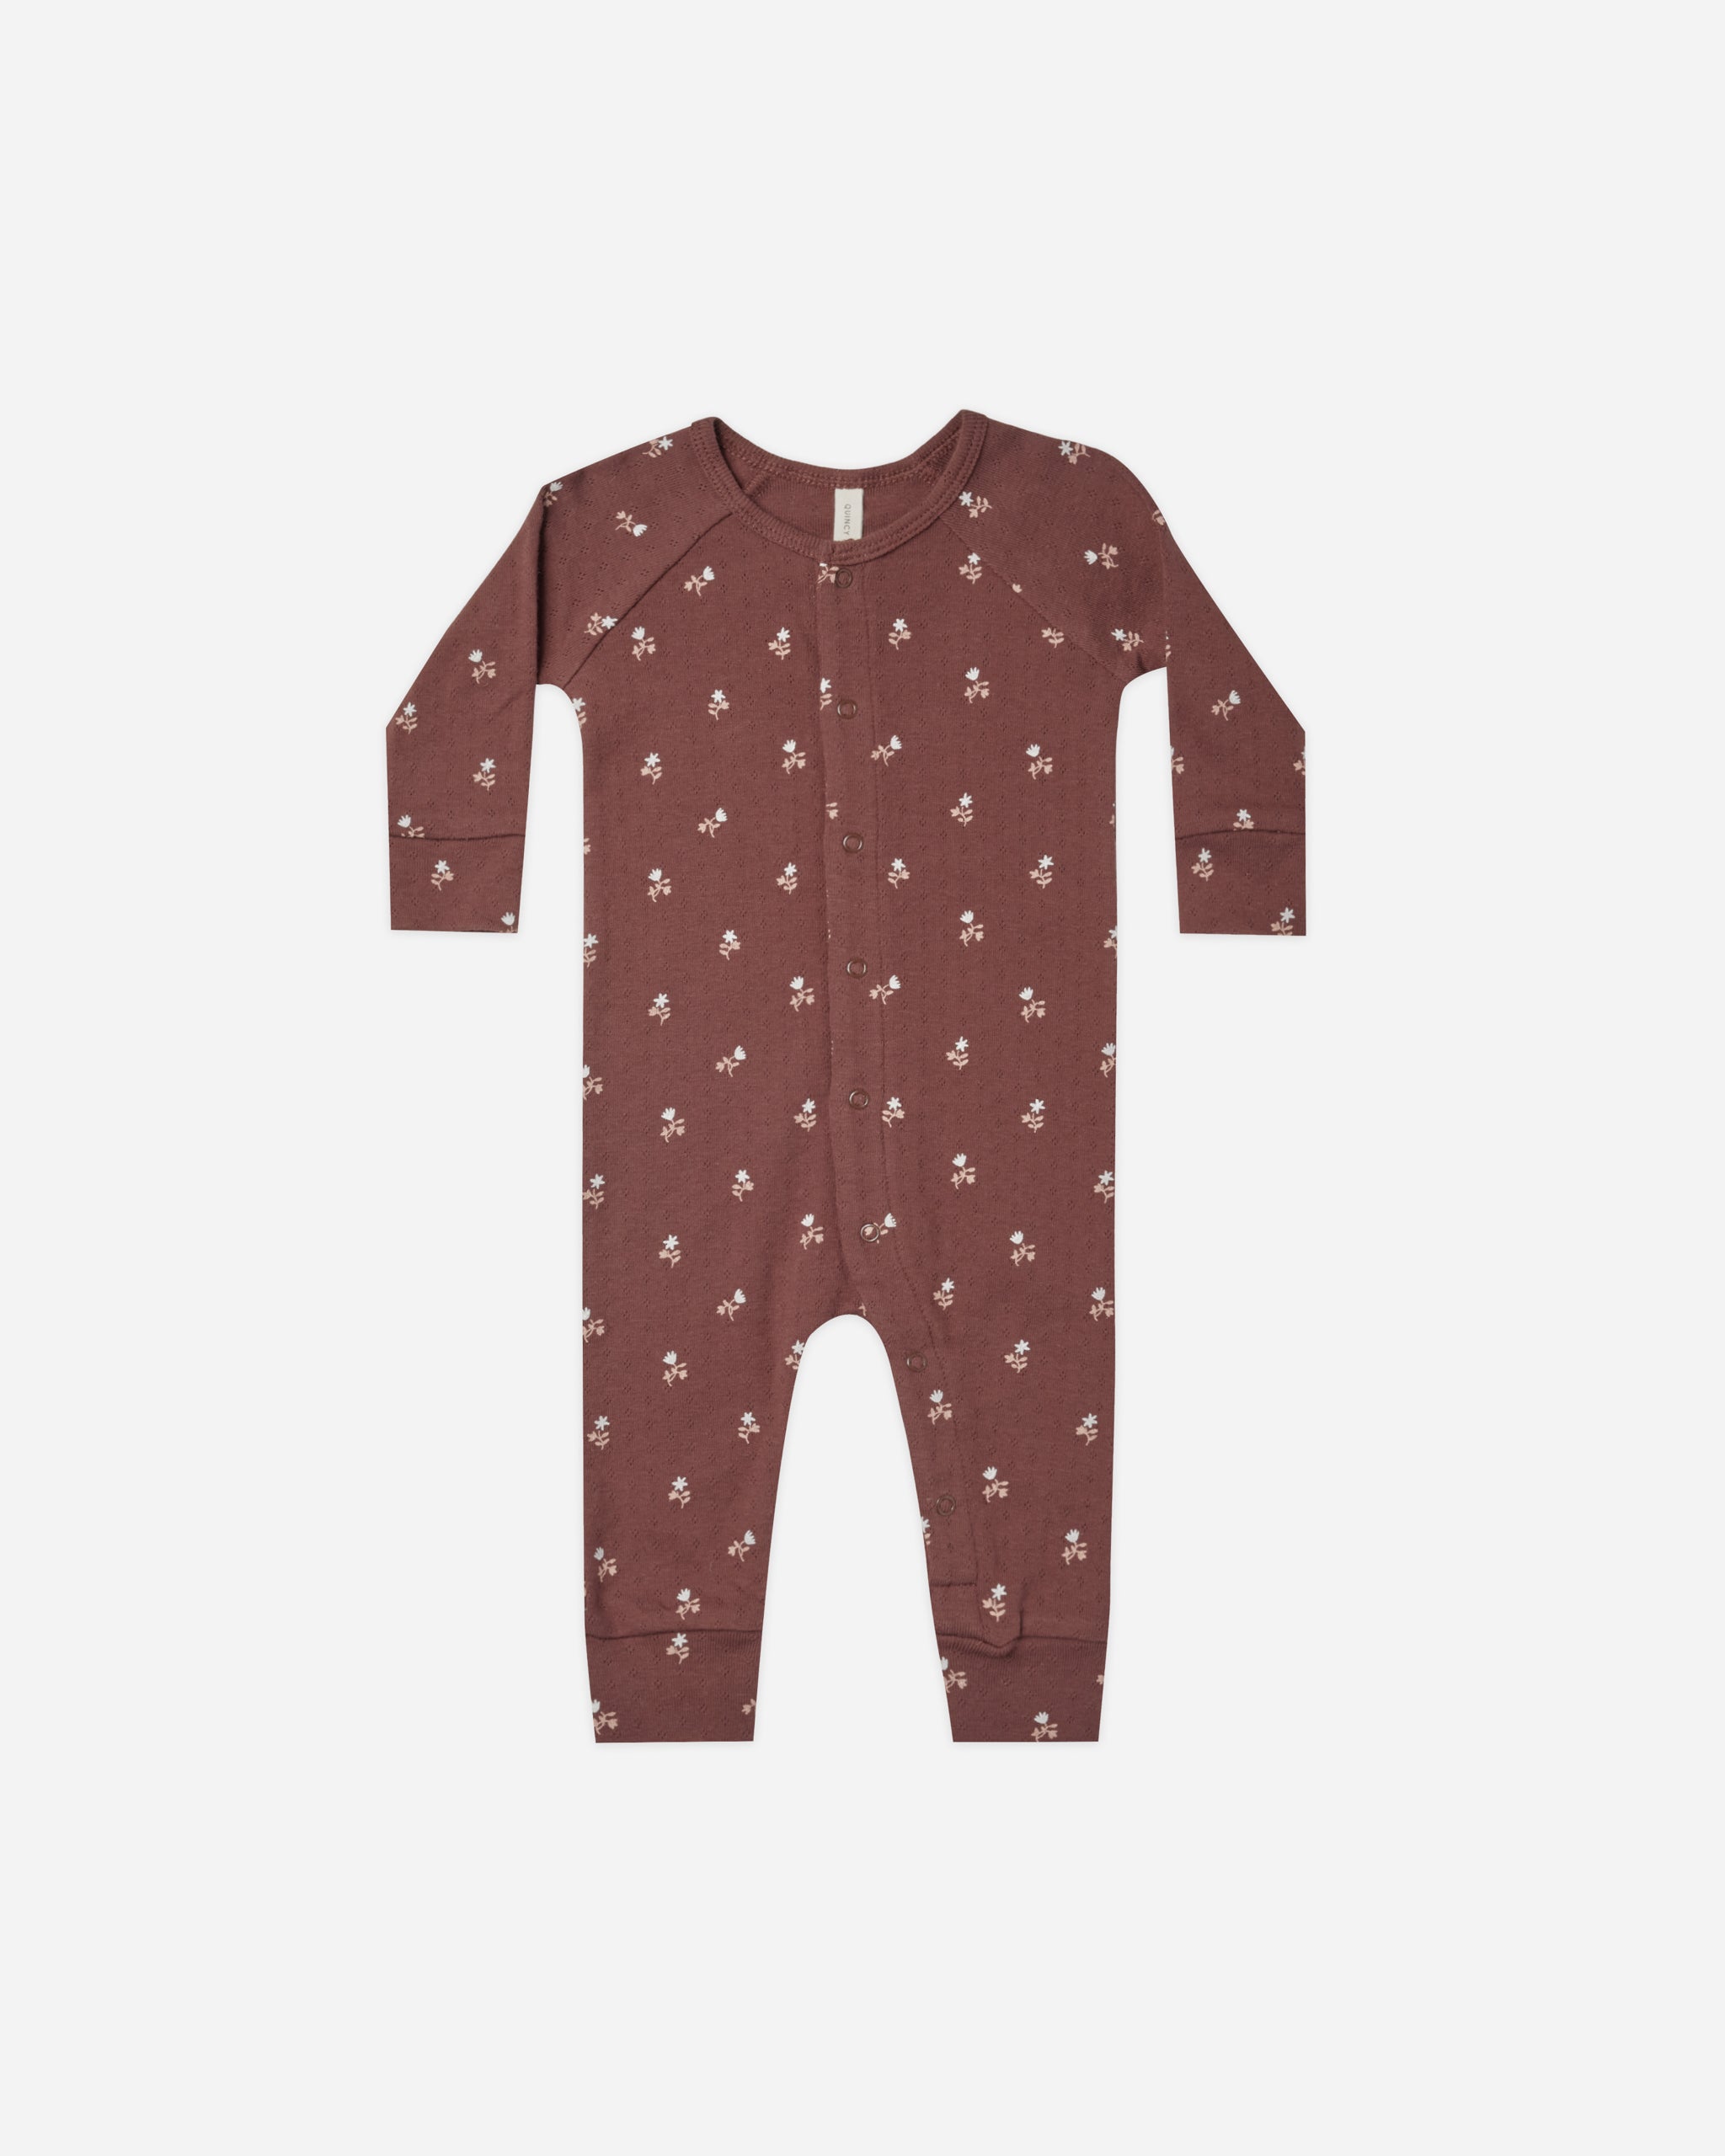 Pointelle Long John || Plum Fleur - Rylee + Cru | Kids Clothes | Trendy Baby Clothes | Modern Infant Outfits |